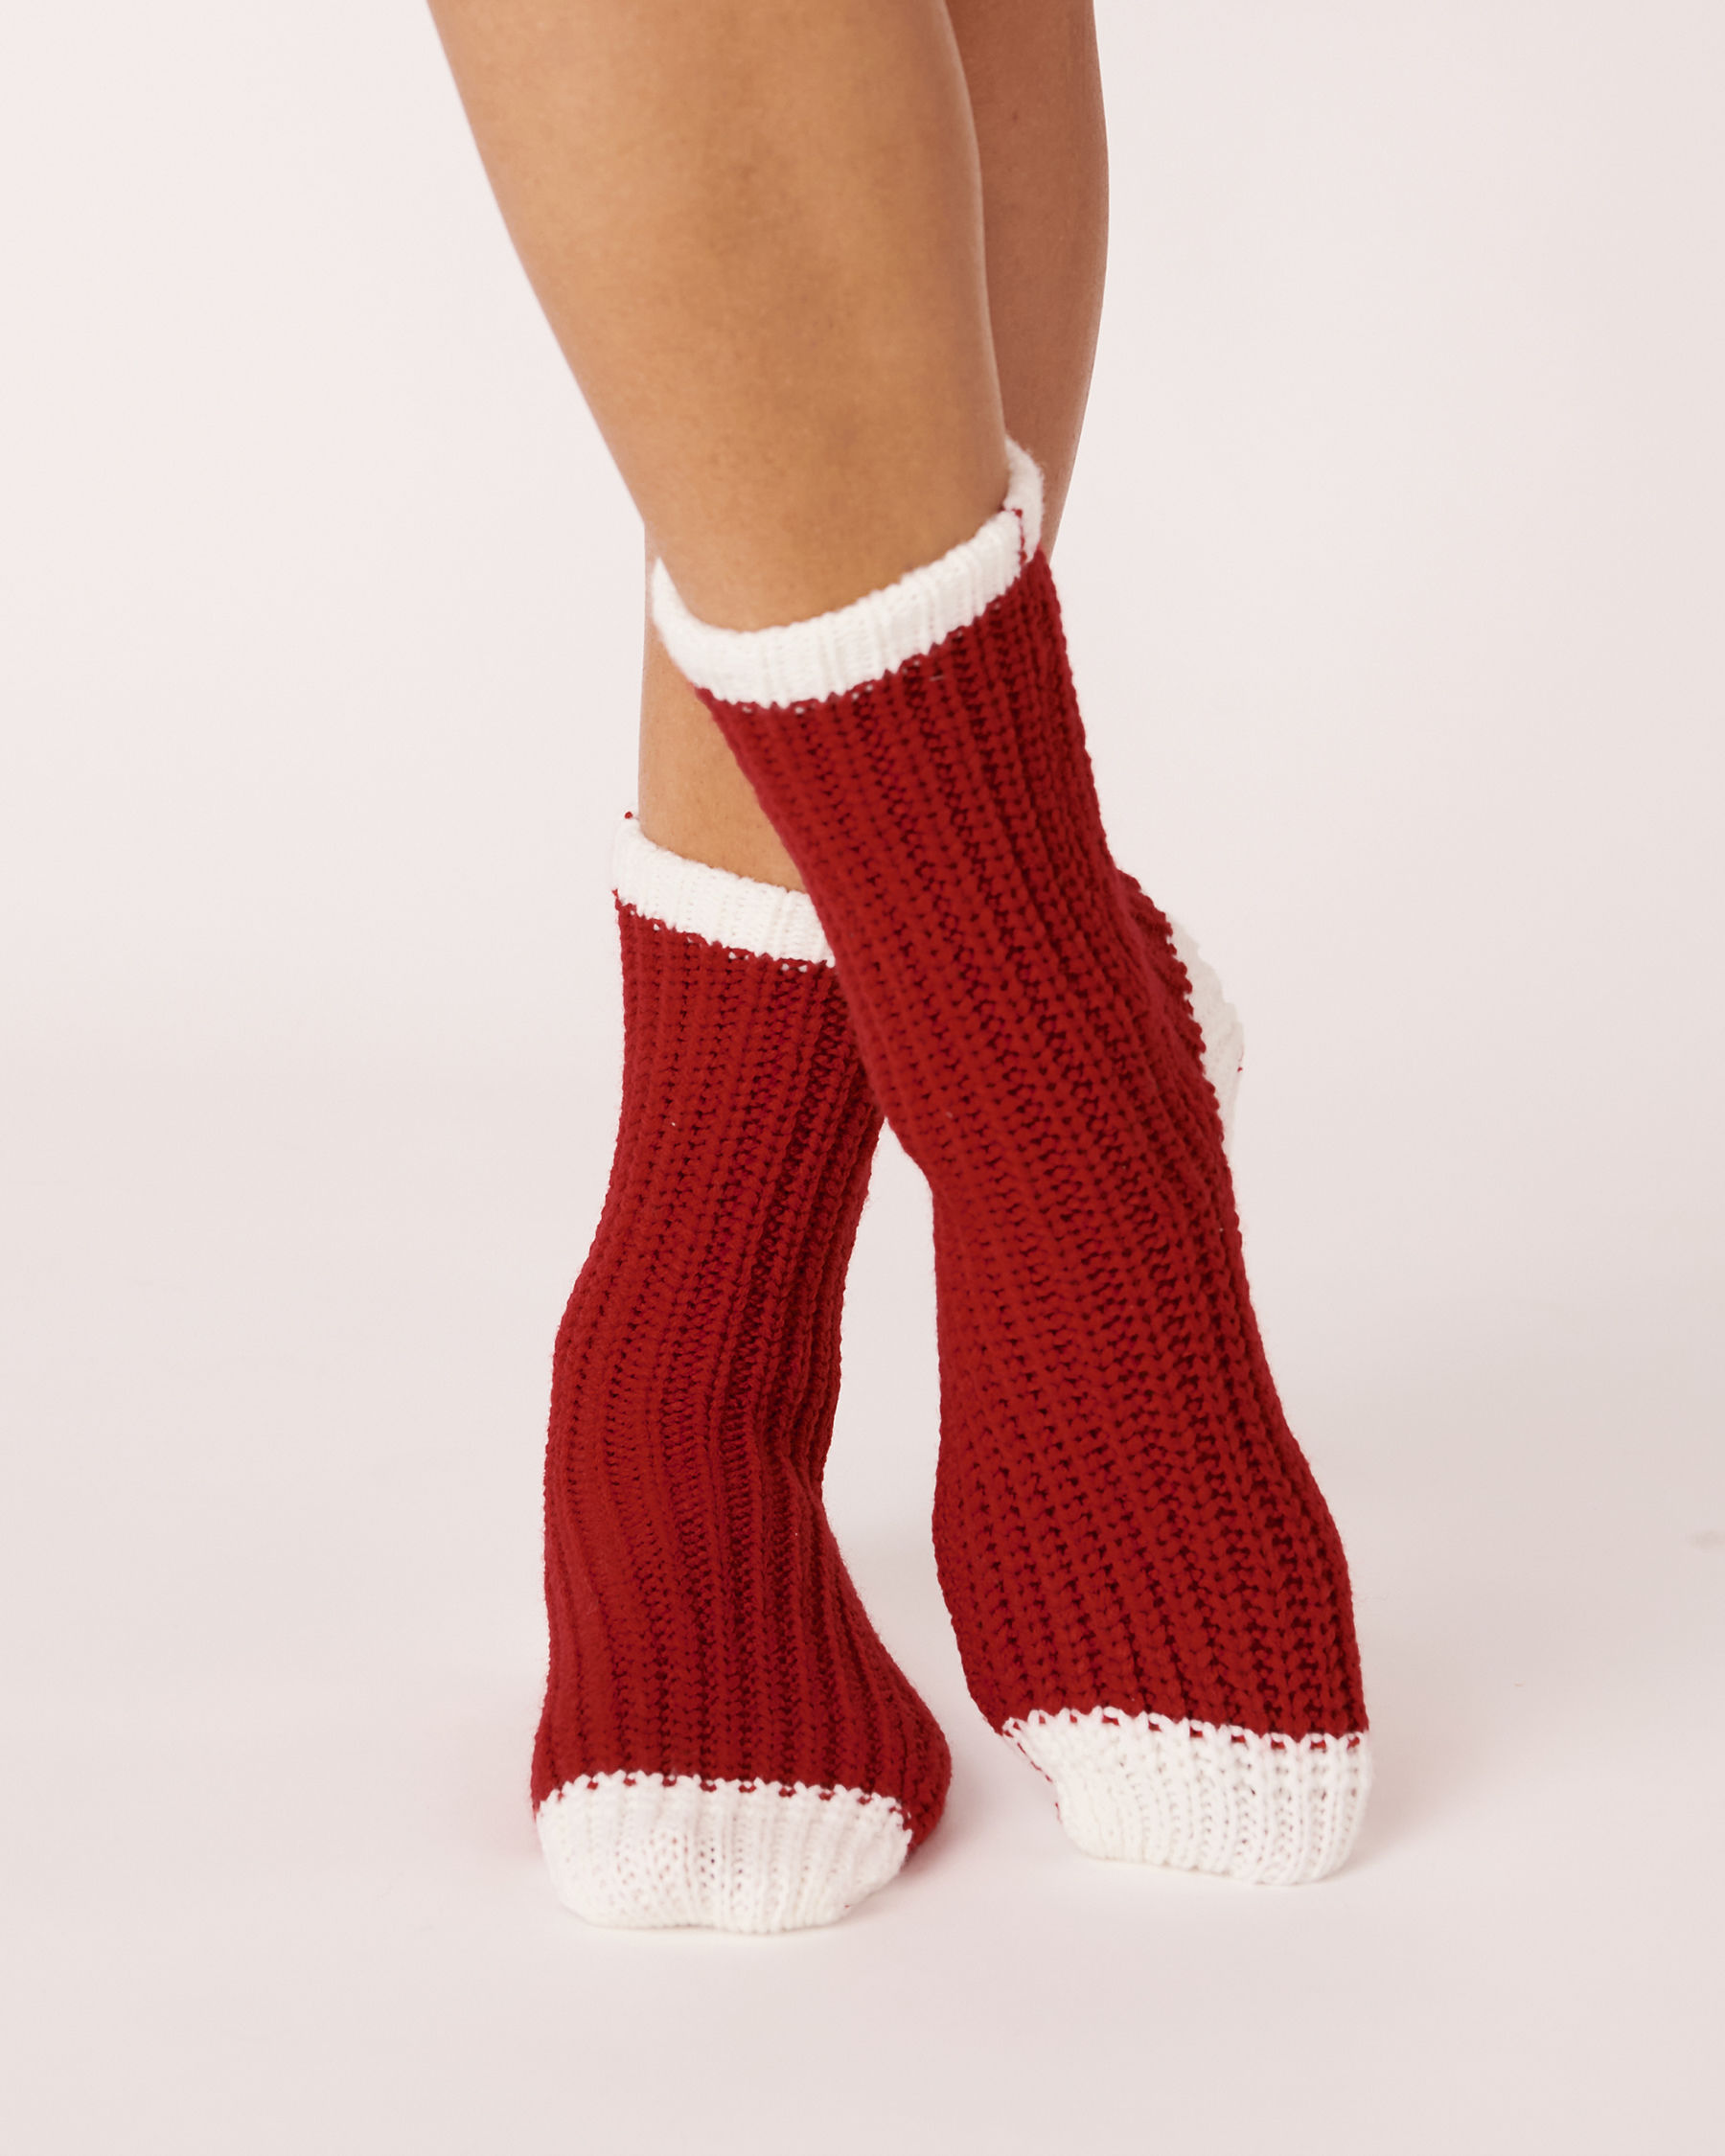 LA VIE EN ROSE Knitted socks with embroidery Classic red 560-514-0-09 - View3